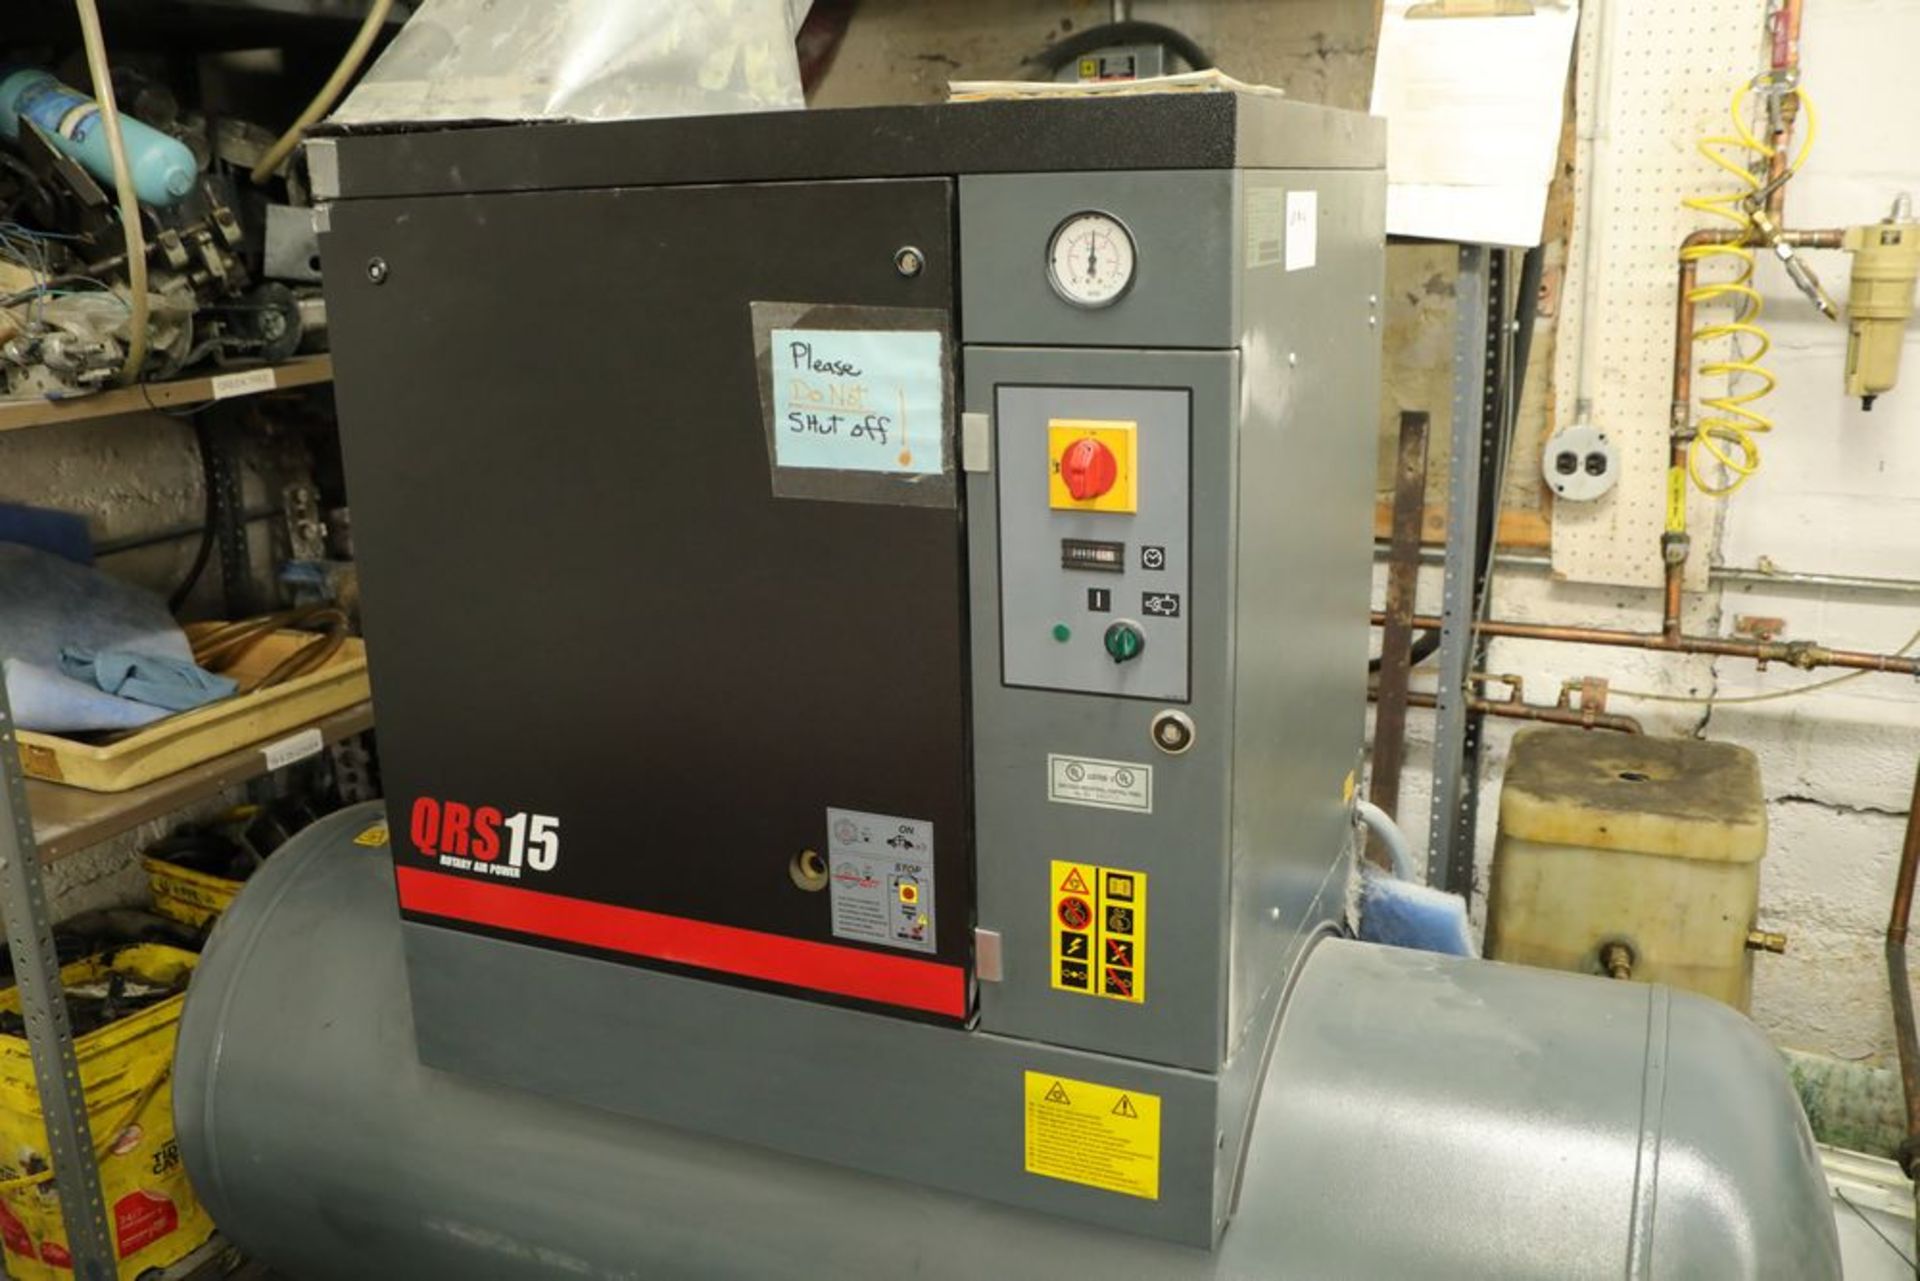 2006 QRS15 Rotary Air-Power air compressor with a Wilkerson air drying system, fully functional - Image 2 of 3